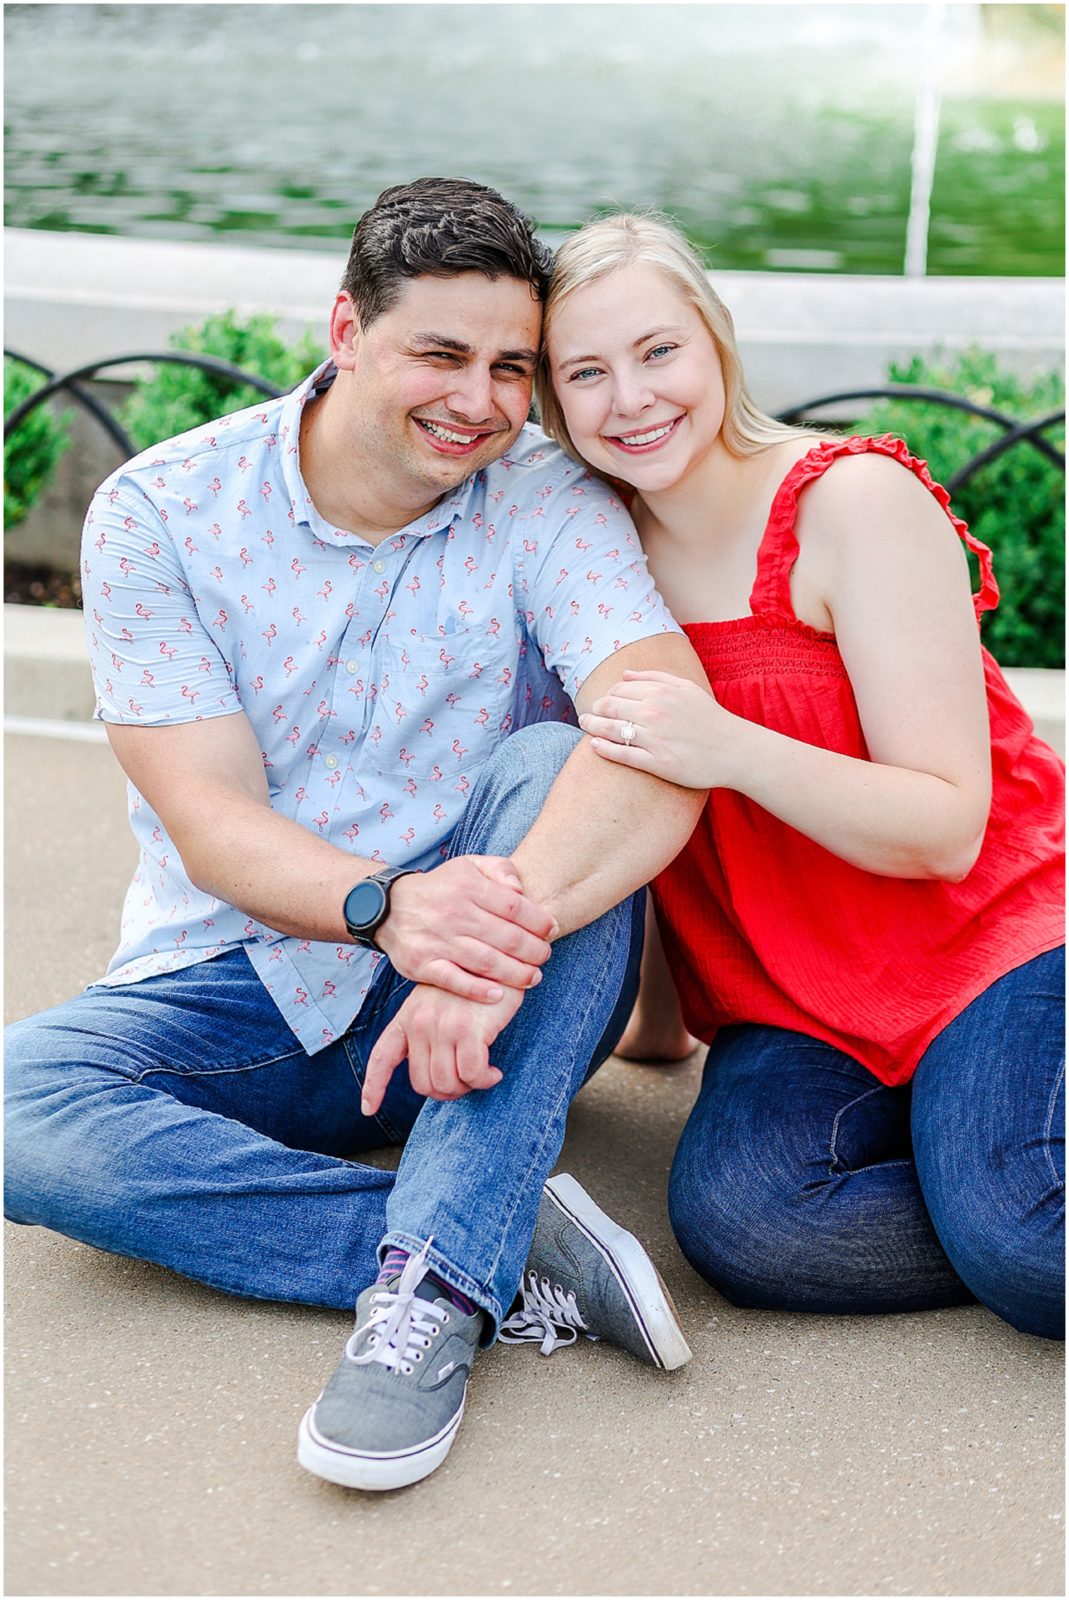 zach and sarah looking cute for their engagement photos 